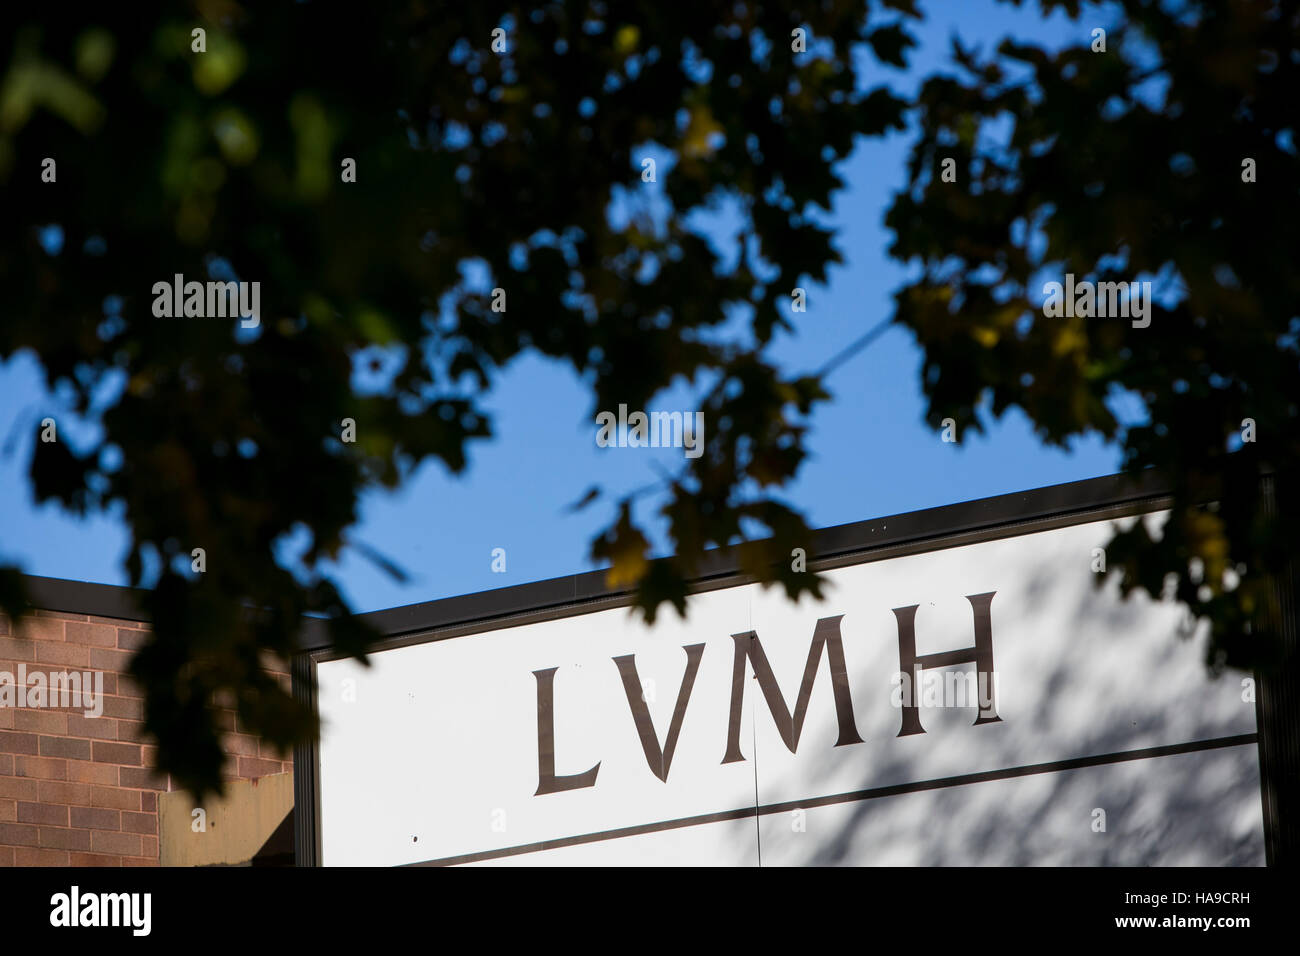 A logo sign outside of a facility occupied by LVMH Moët Hennessy Louis  Vuitton in Piscataway Township, New Jersey on November 6, 2016 Stock Photo  - Alamy